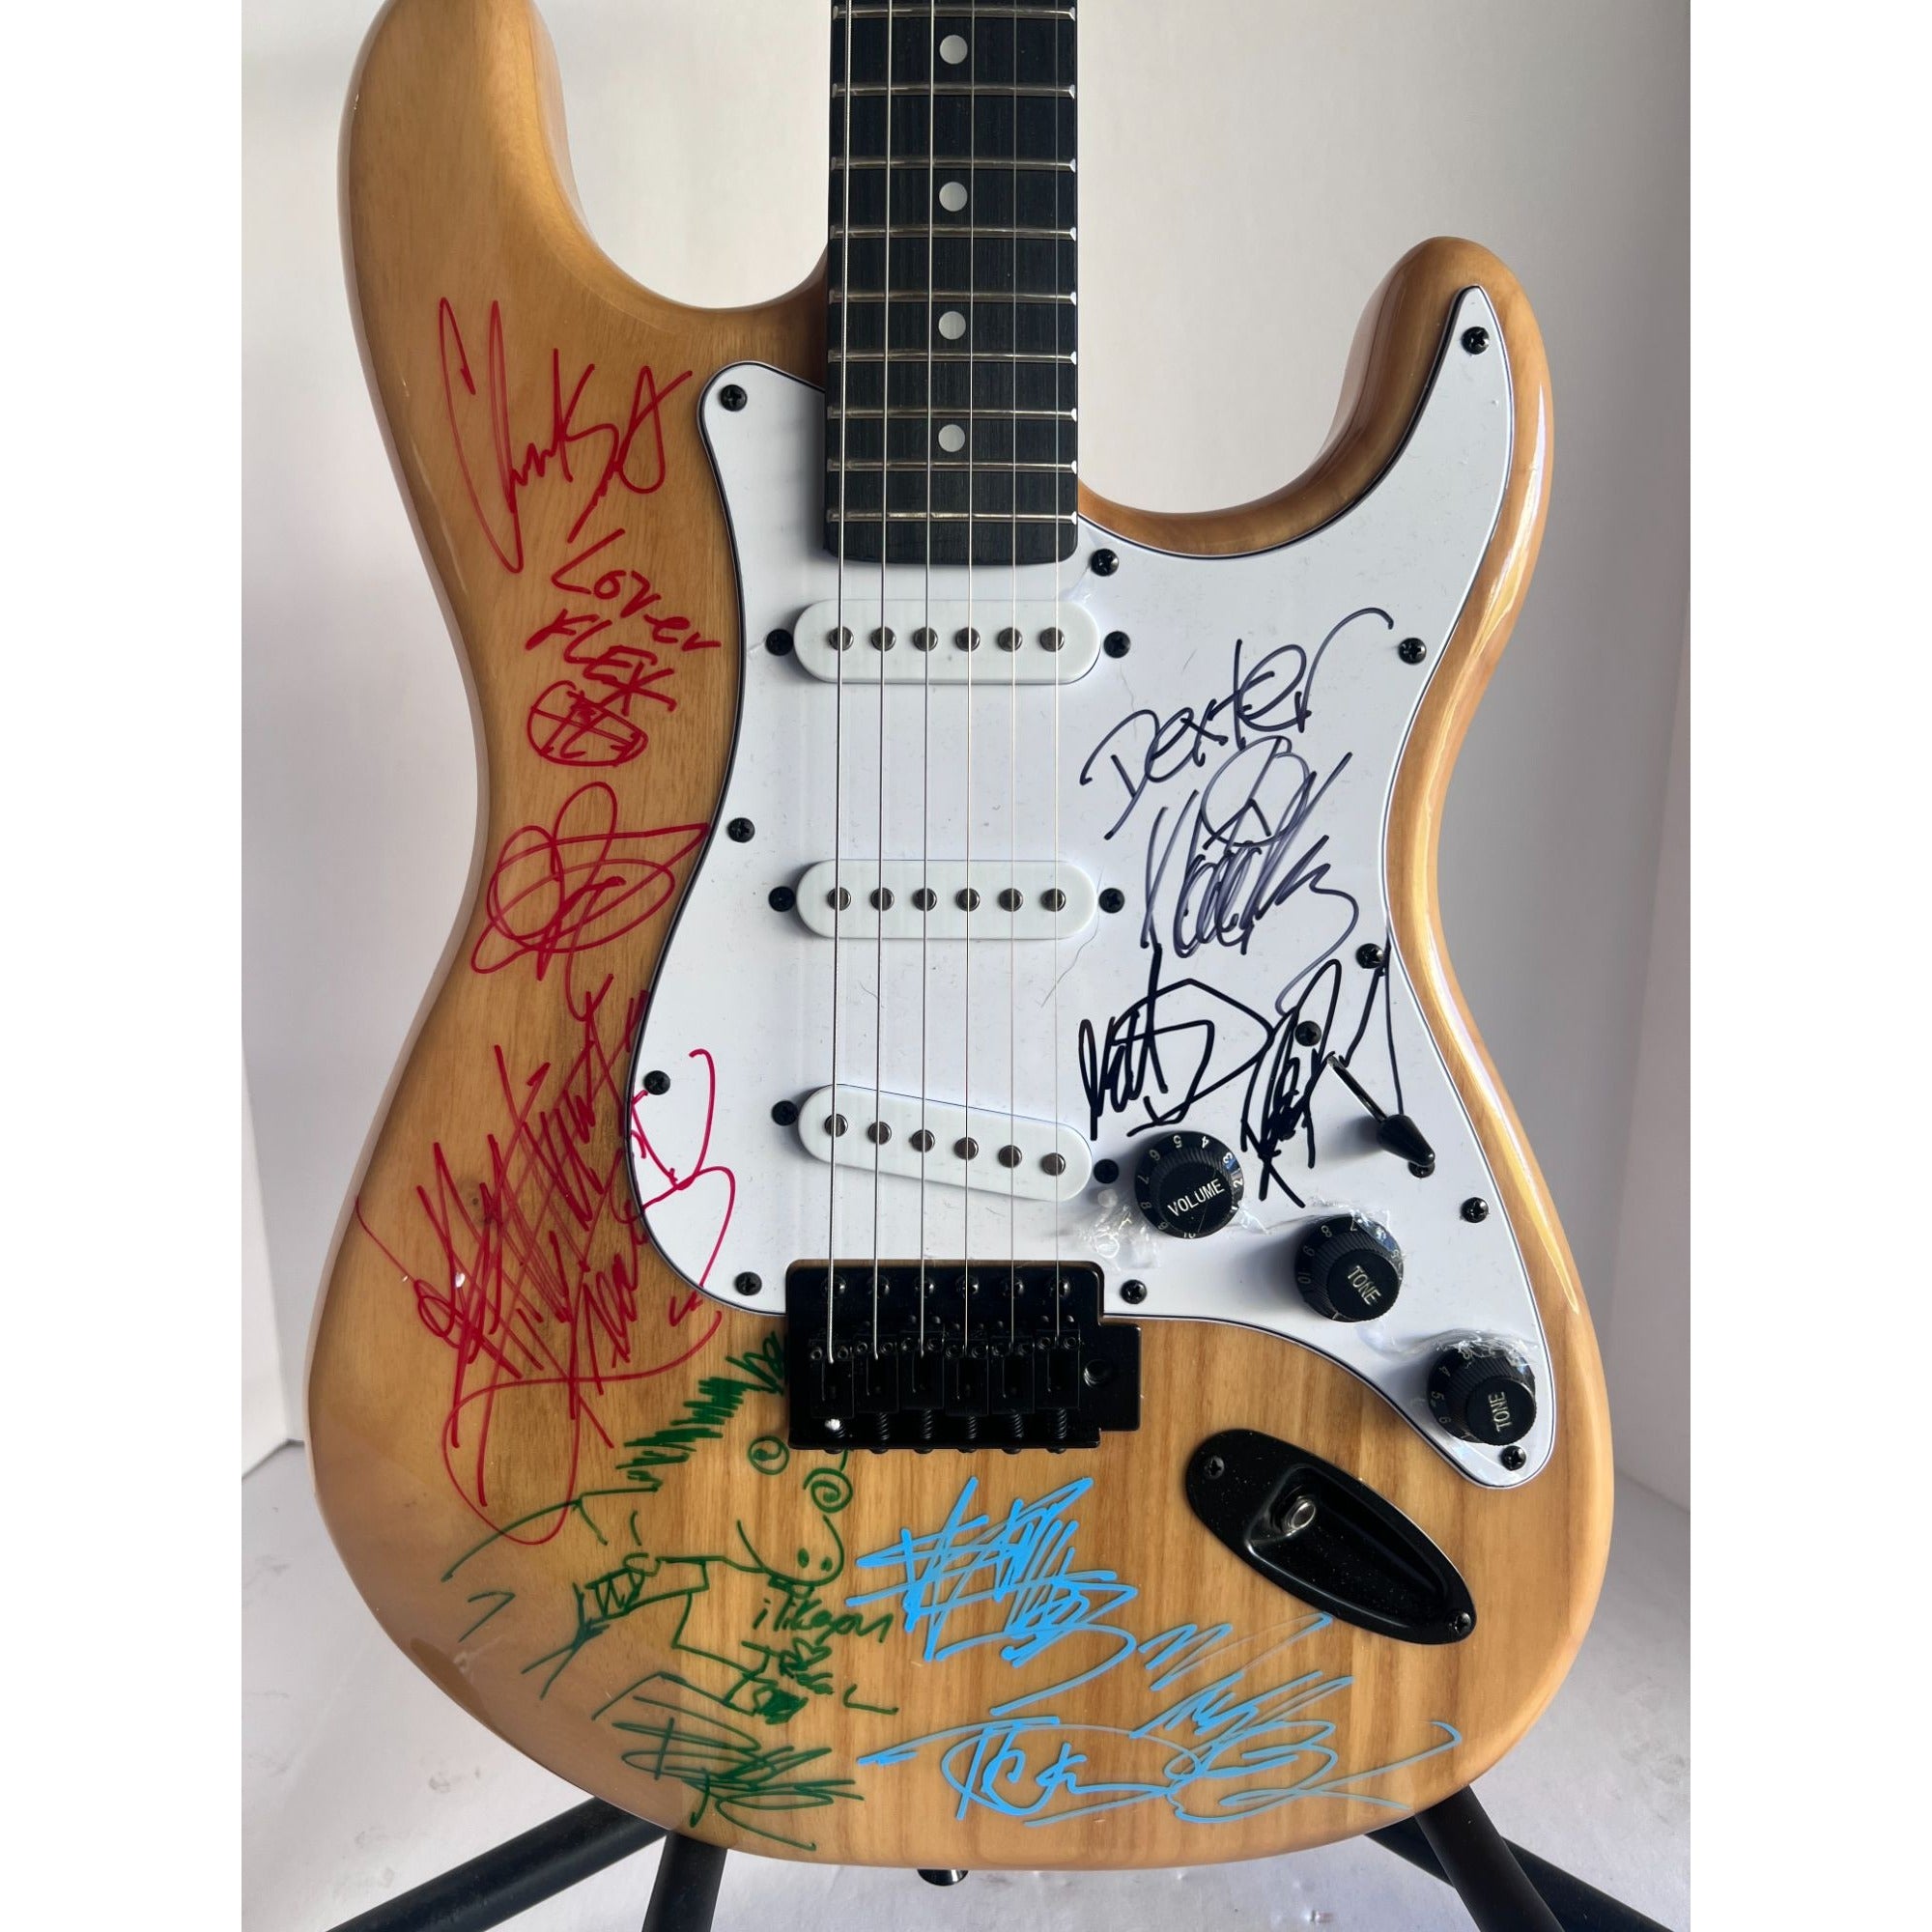 Anthony Kiedis, Dexter Holland, Billy Joe Armstrong, Travis Barker One-of-a-Kind electric guitar signed with proof